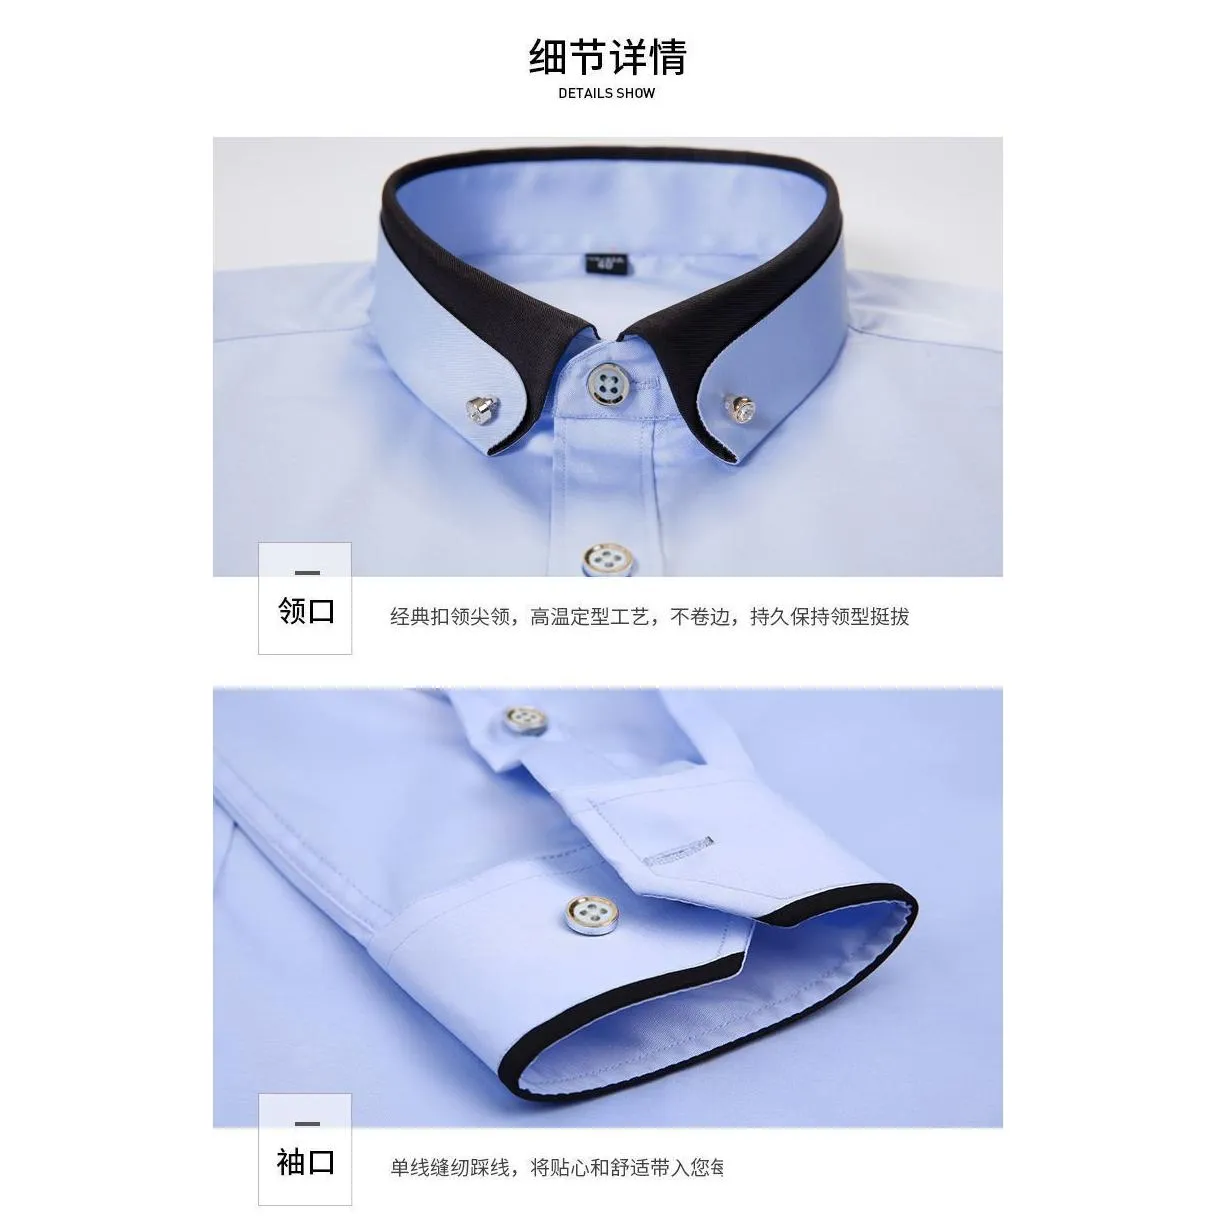  arrival spring commercial easy care shirt male oversize long-sleeve fashion formal high quality plus size m-7xl8xl9xl